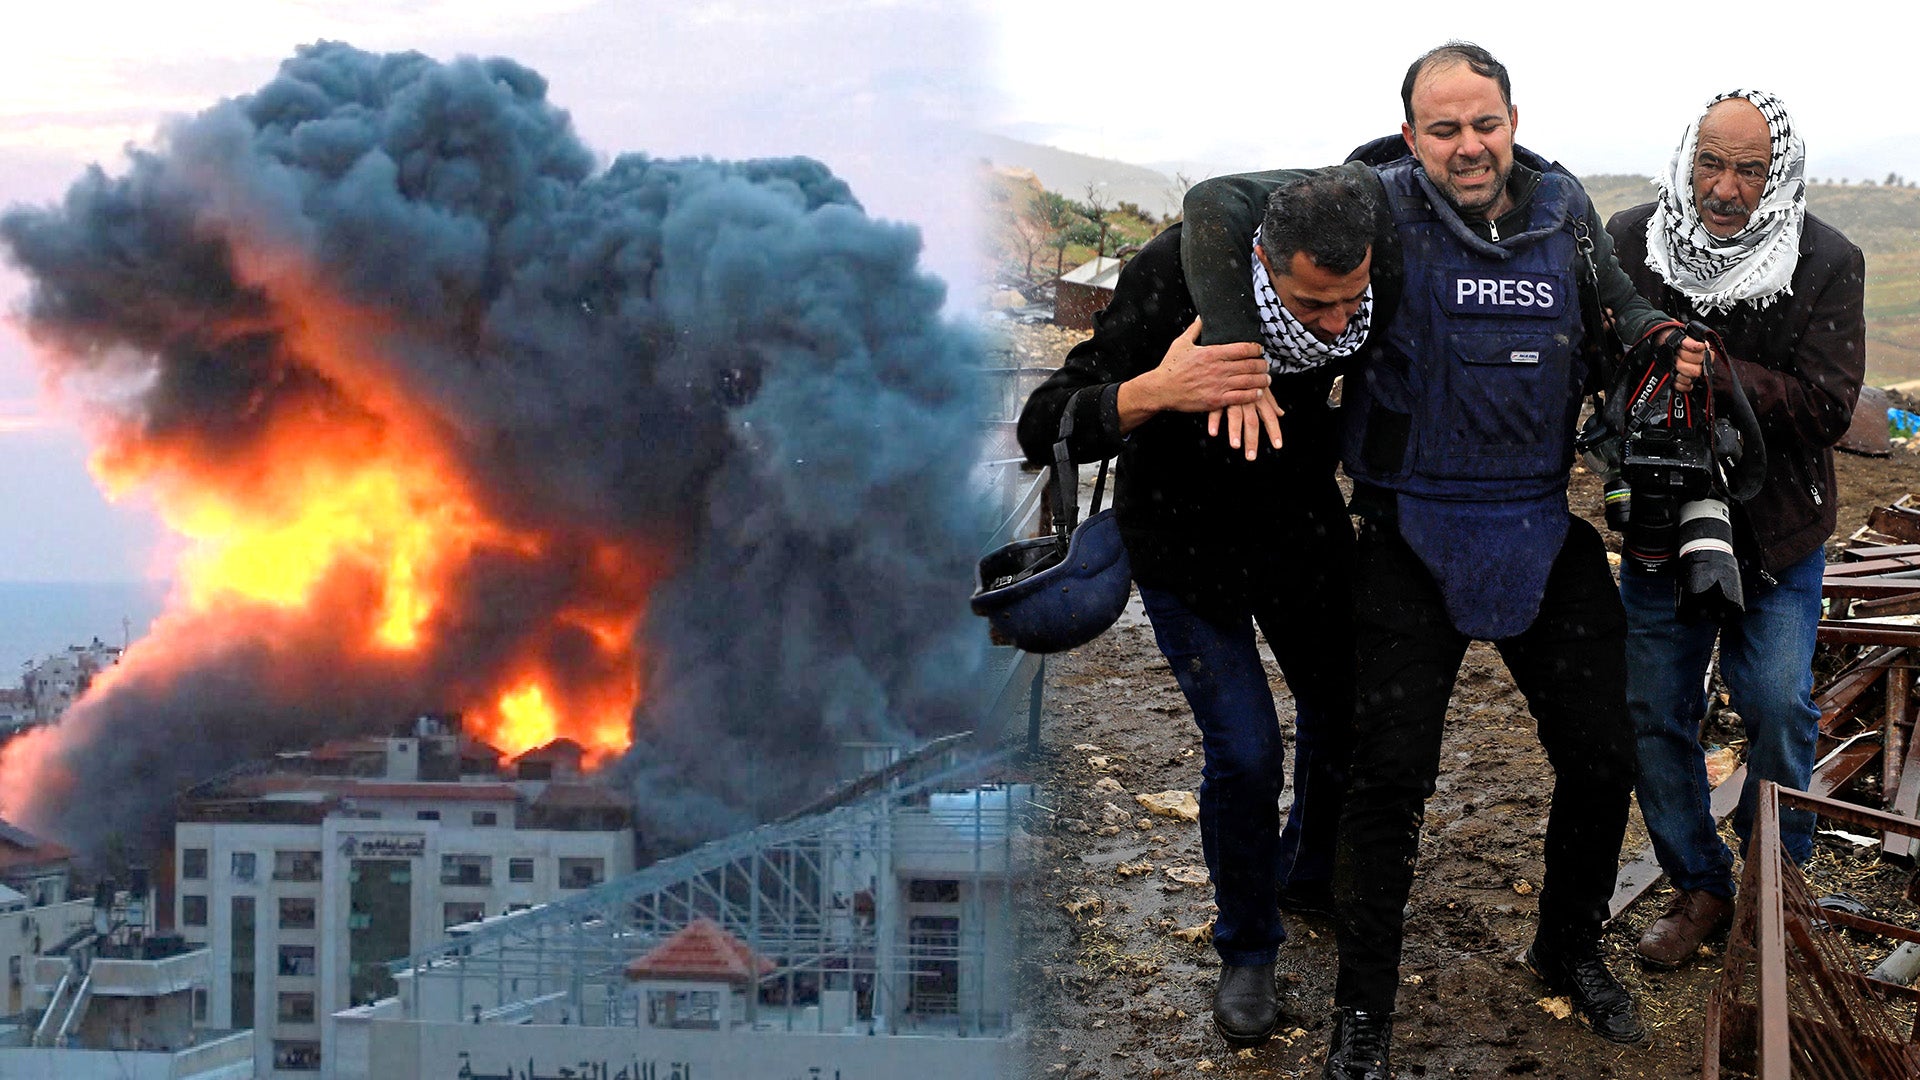 Israel in Conflict: Network Journalists Under Fire as They Report From War Zone